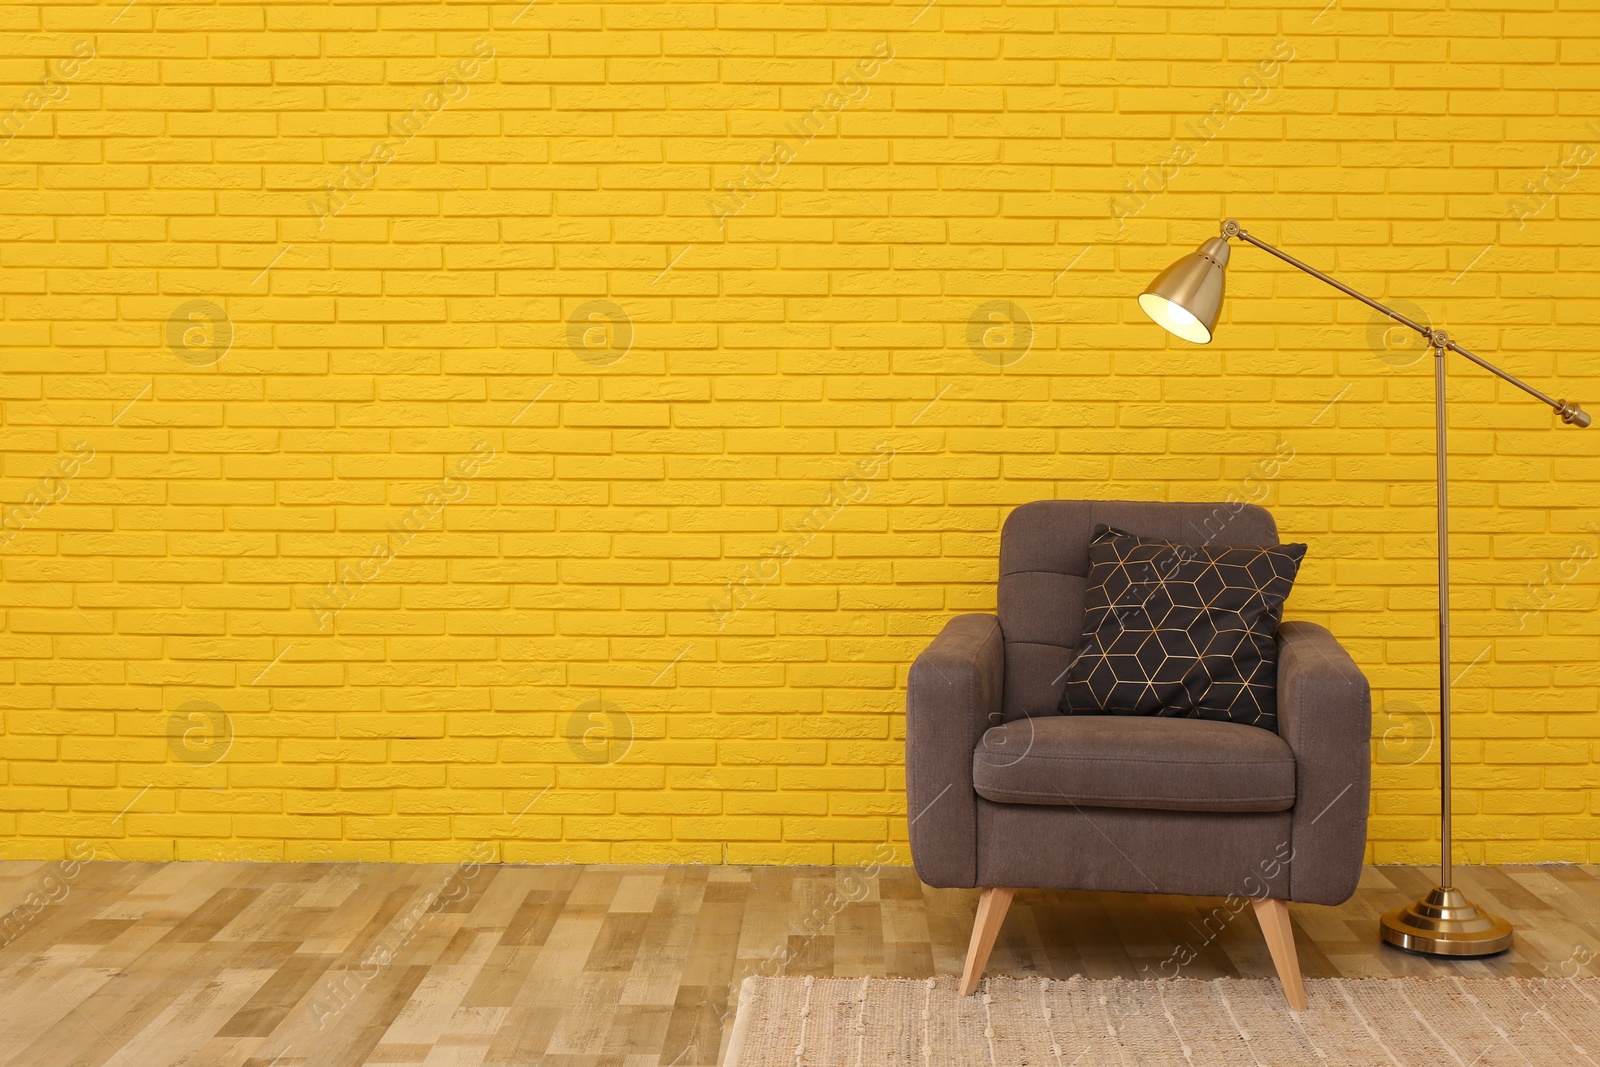 Photo of Stylish armchair and lamp near yellow brick wall in room, space for text. Interior design